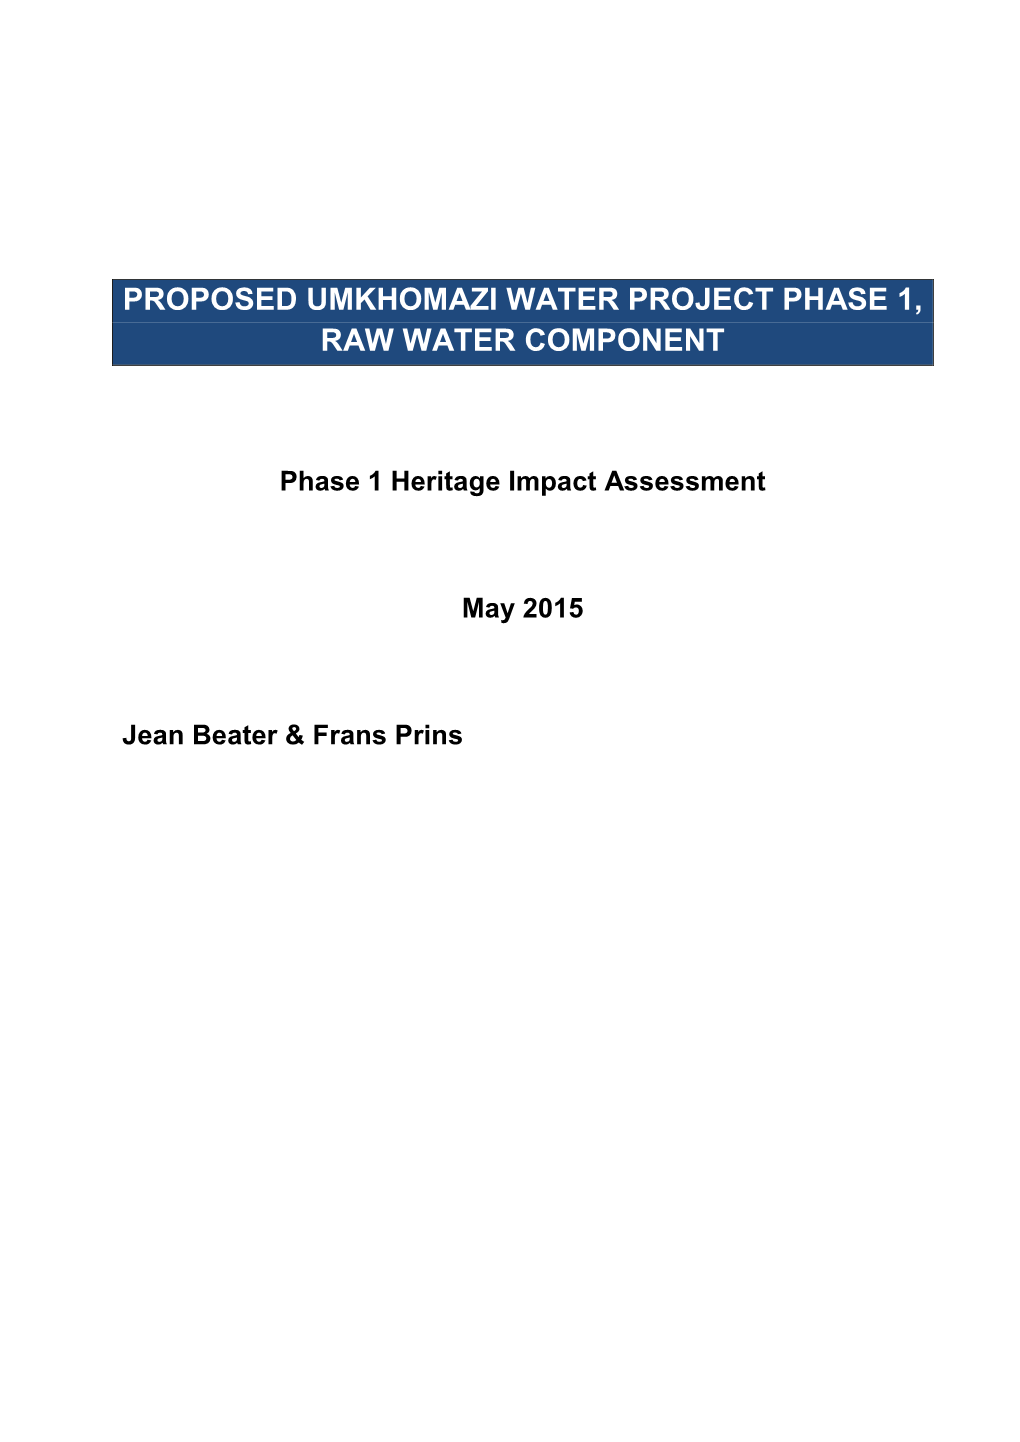 Proposed Umkhomazi Water Project Phase 1, Raw Water Component